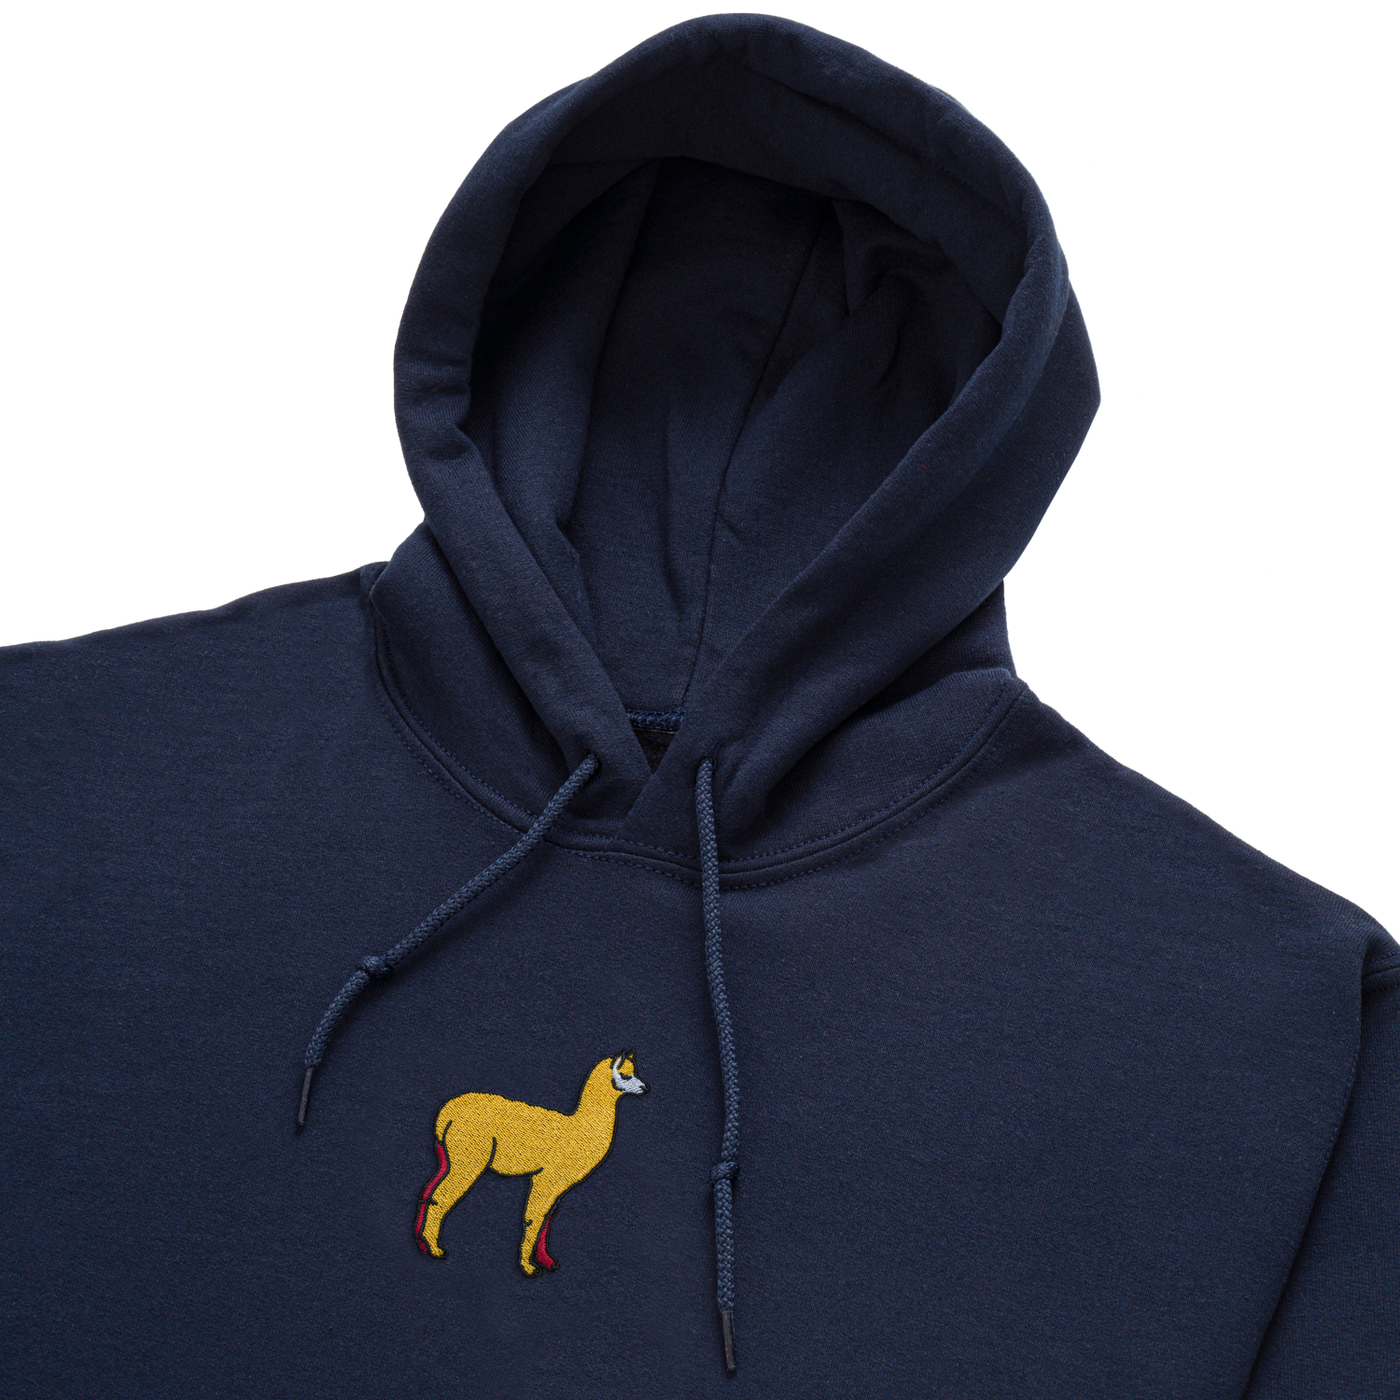 Bobby's Planet Men's Embroidered Alpaca Hoodie from South American Amazon Animals Collection in Navy Color#color_navy